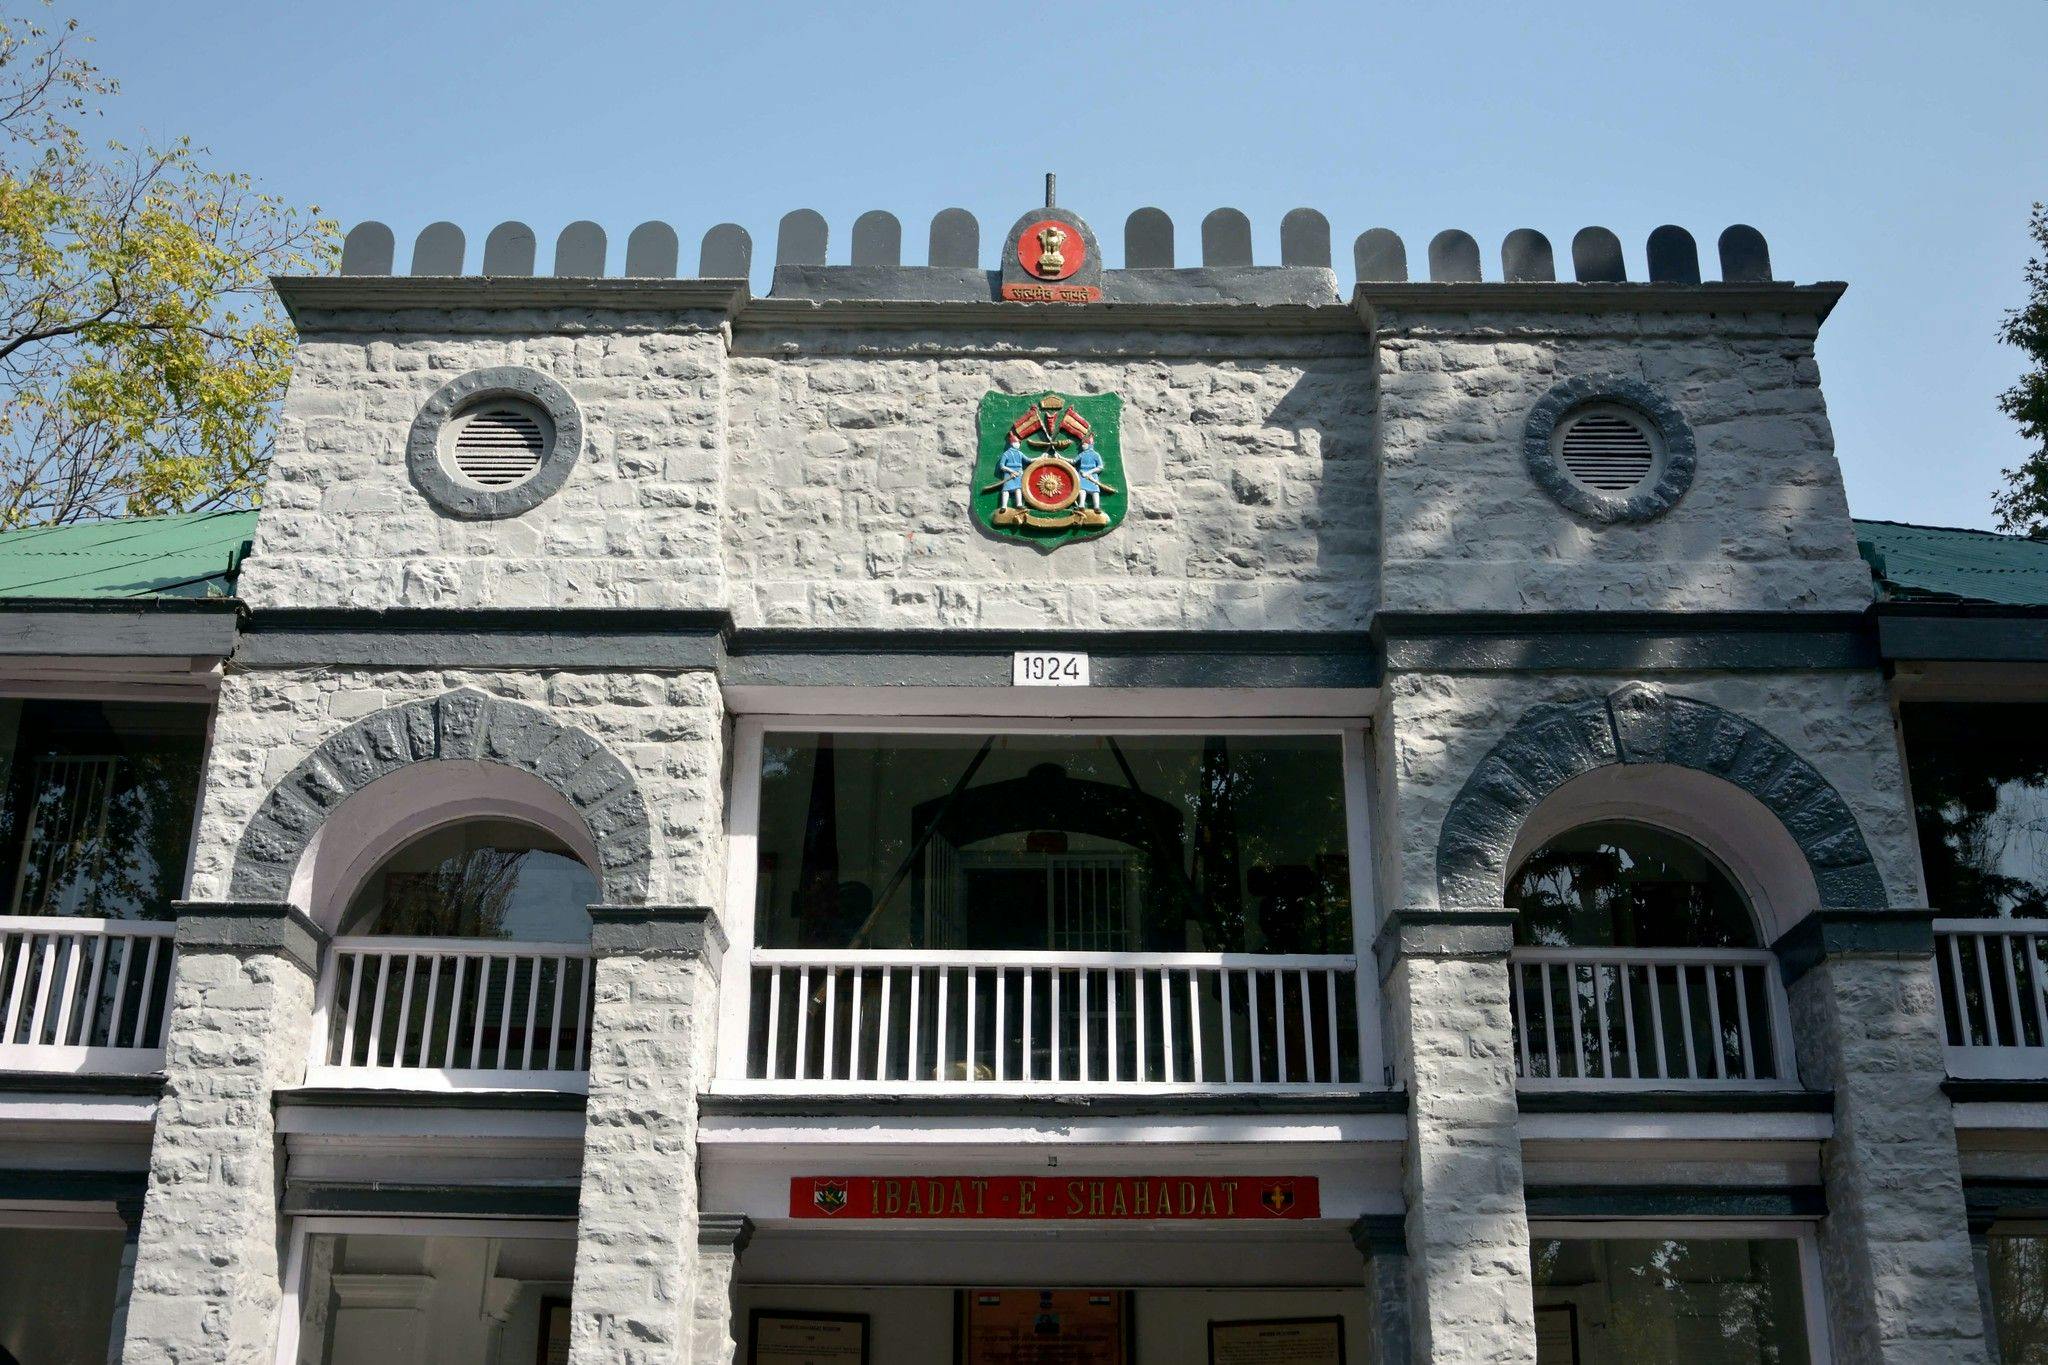 The Royal Dogra Insignia on the museum building